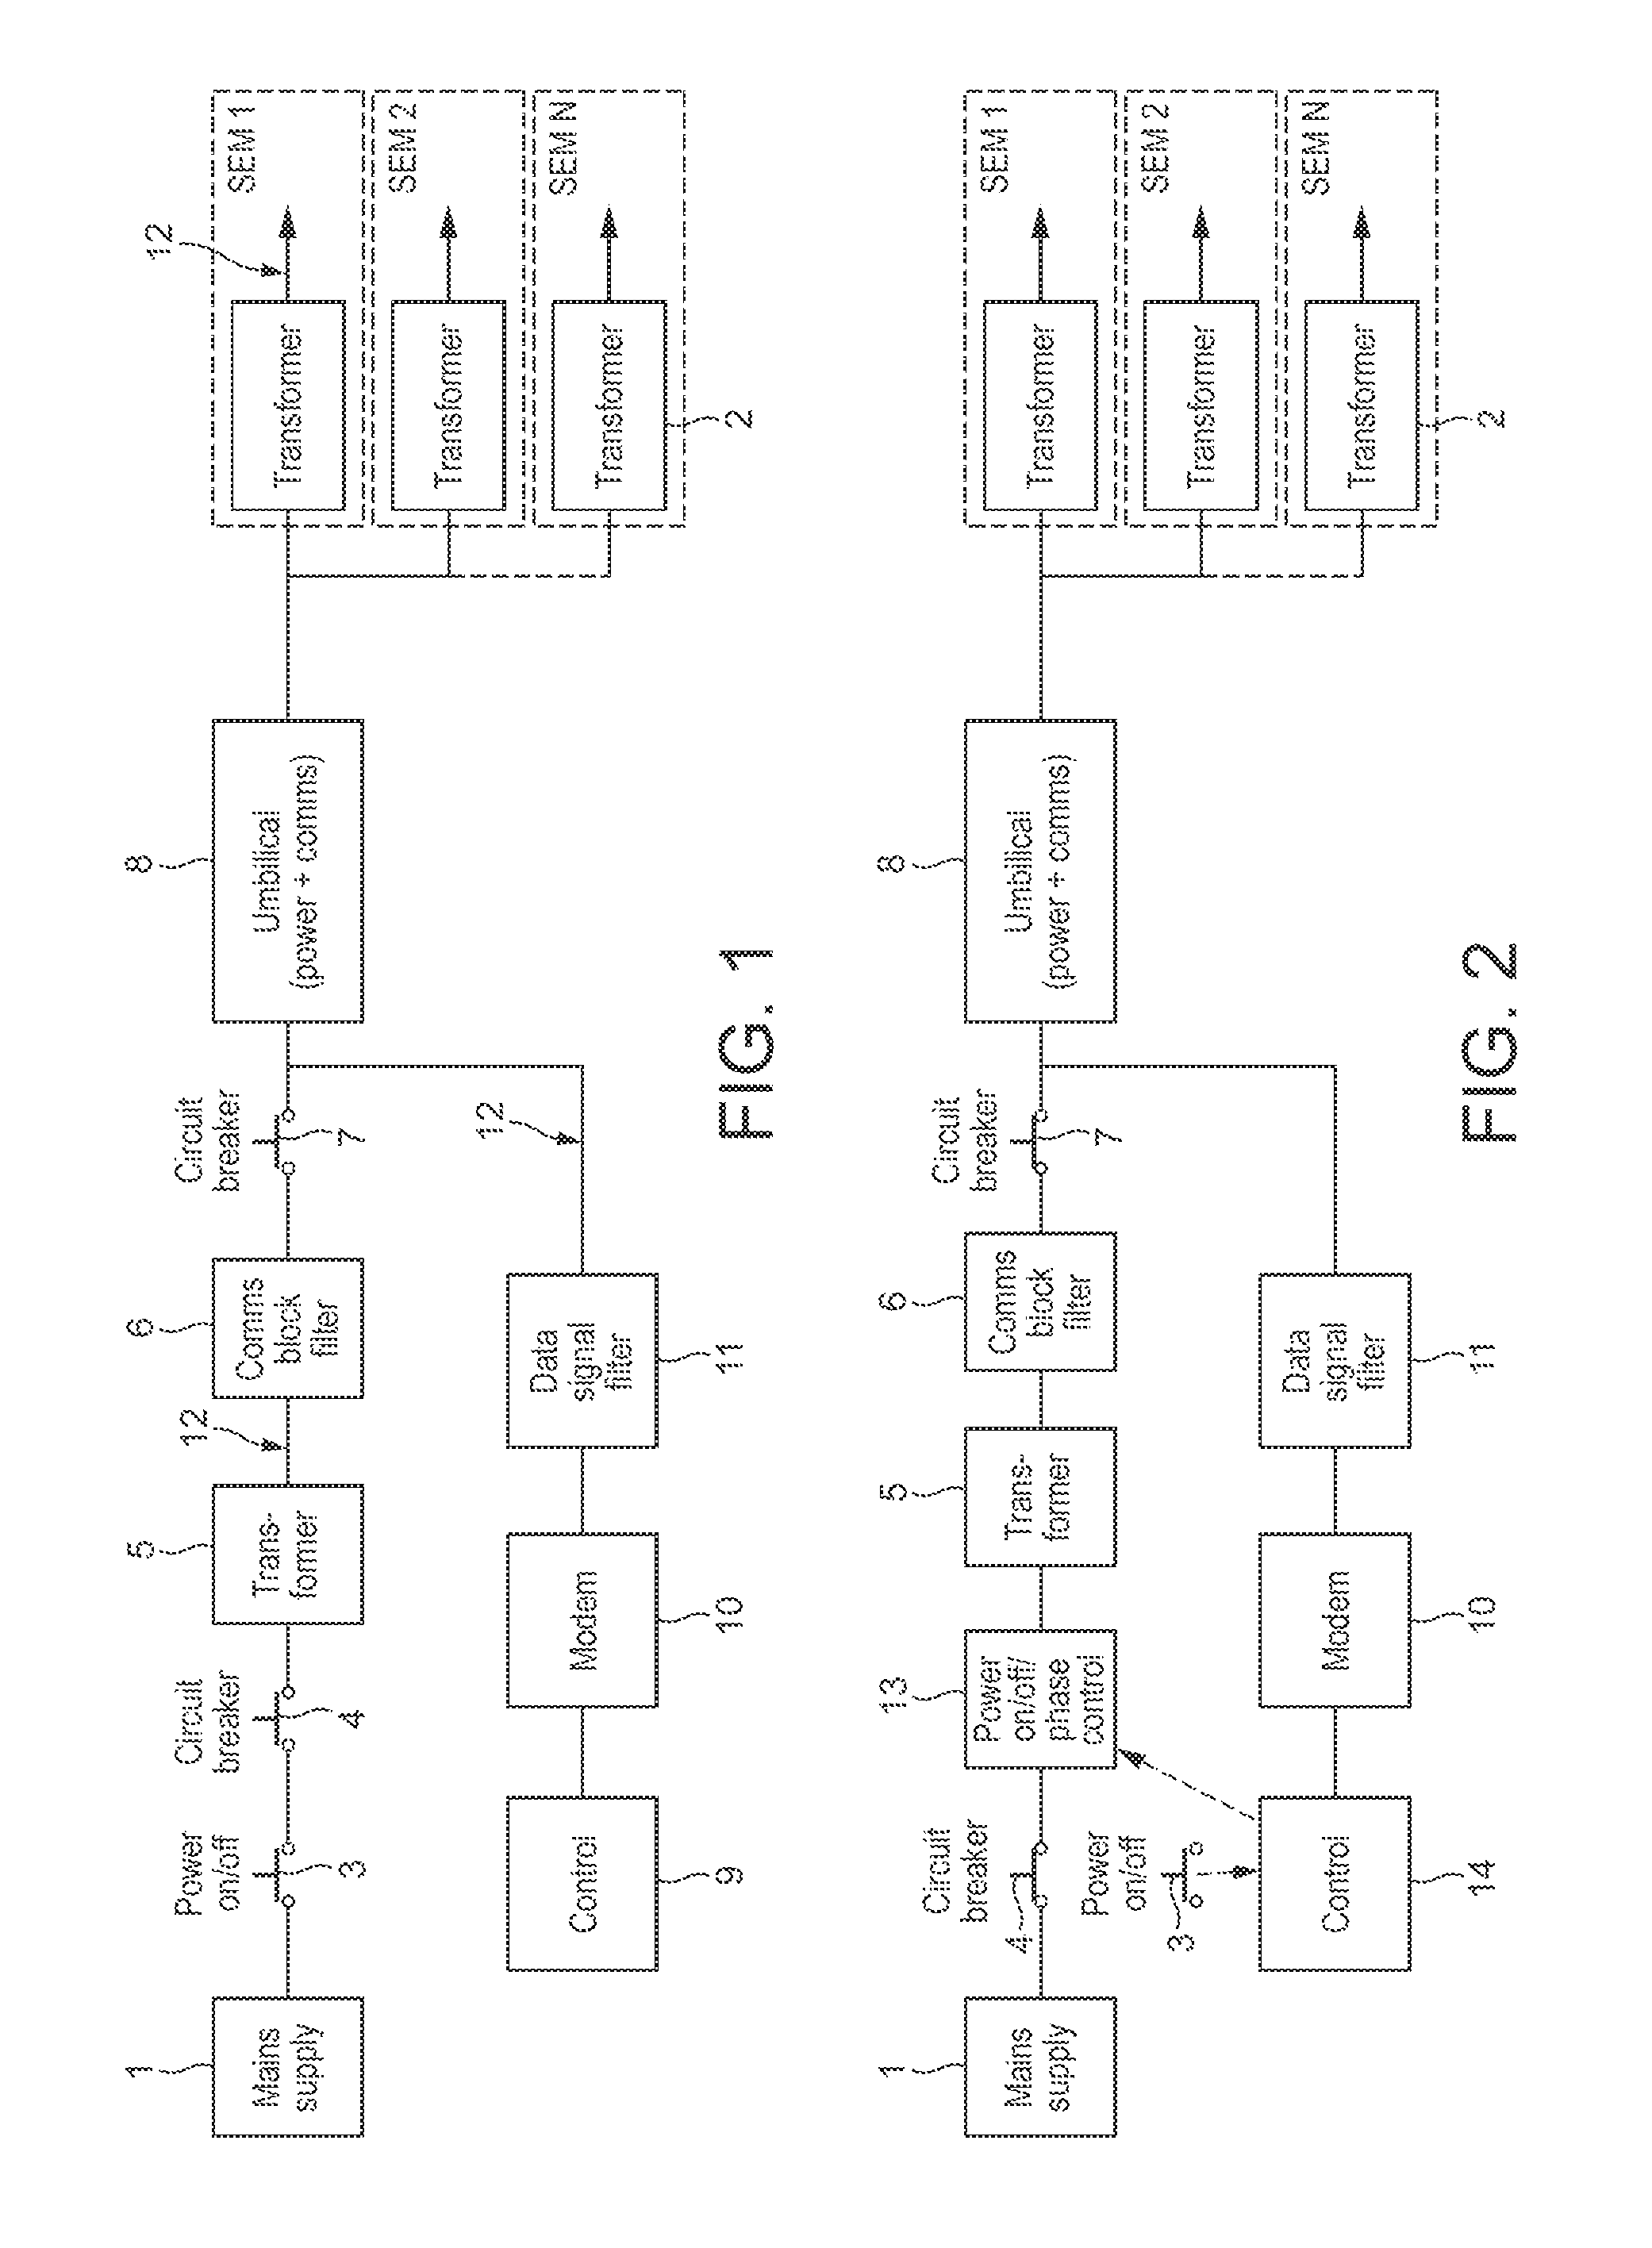 Protecting against transients in a communication system